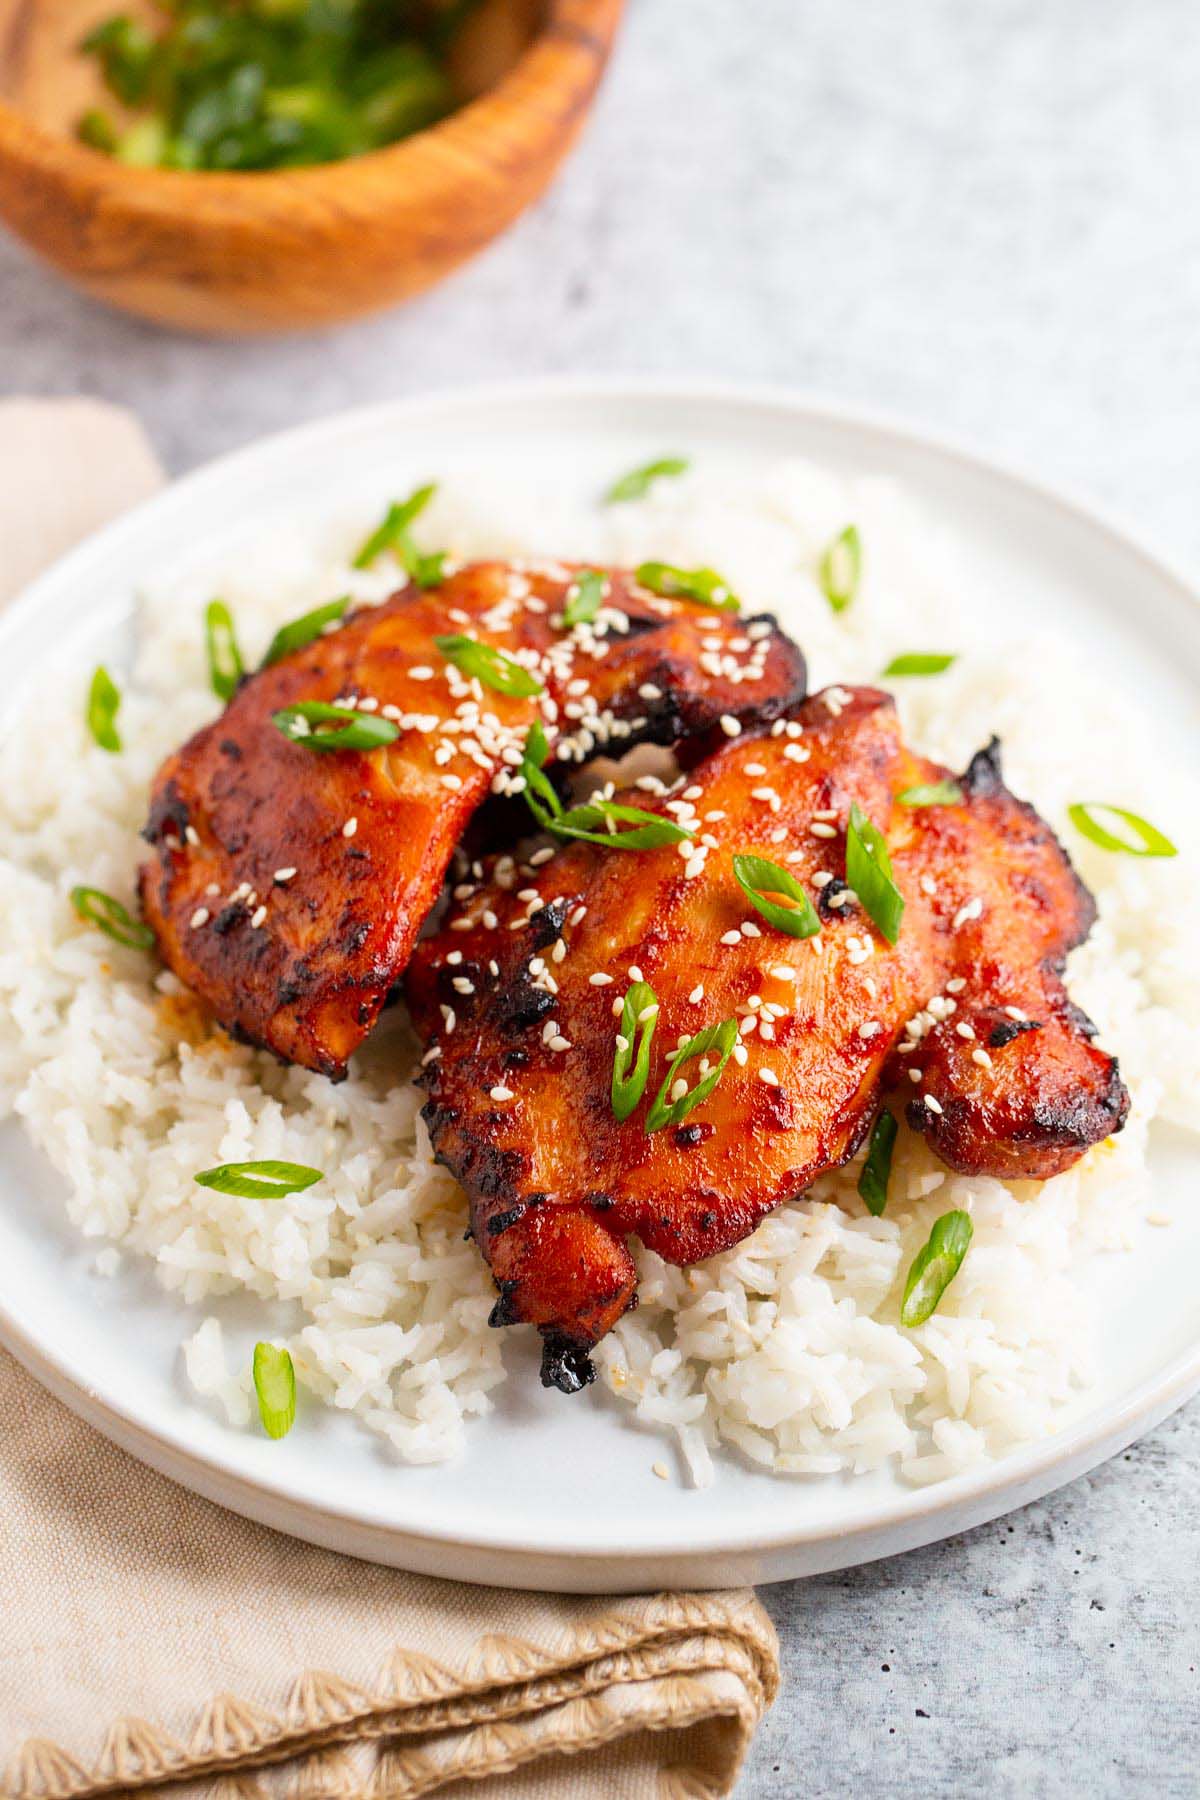 Gochujang chicken thighs on a bed of rice.